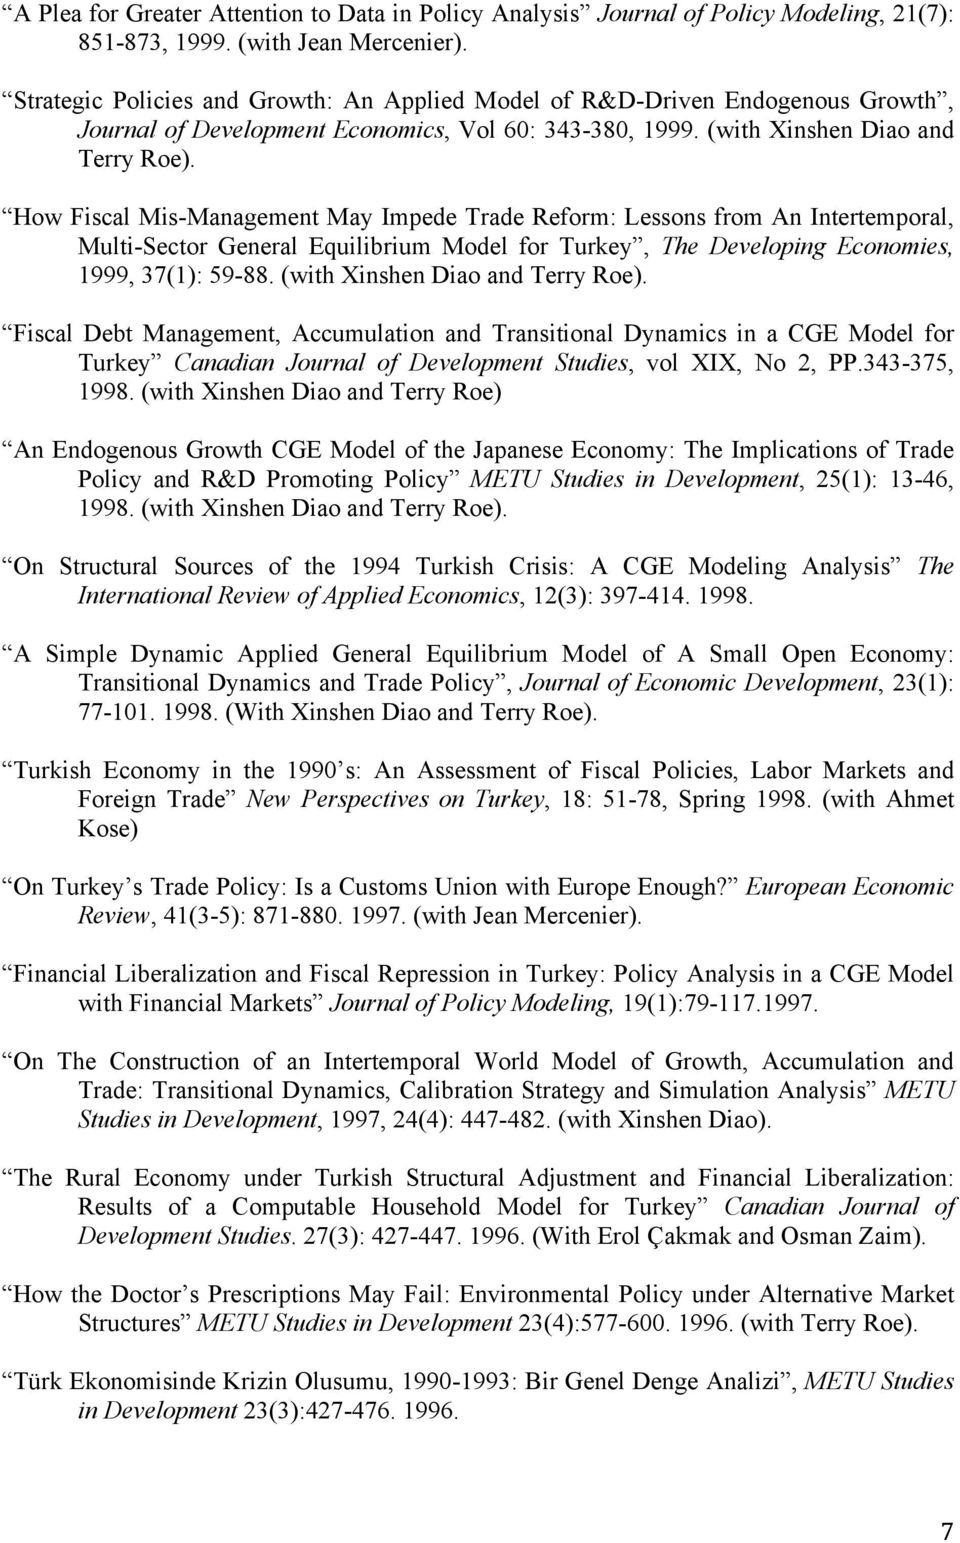 How Fiscal Mis-Management May Impede Trade Reform: Lessons from An Intertemporal, Multi-Sector General Equilibrium Model for Turkey, The Developing Economies, 1999, 37(1): 59-88.